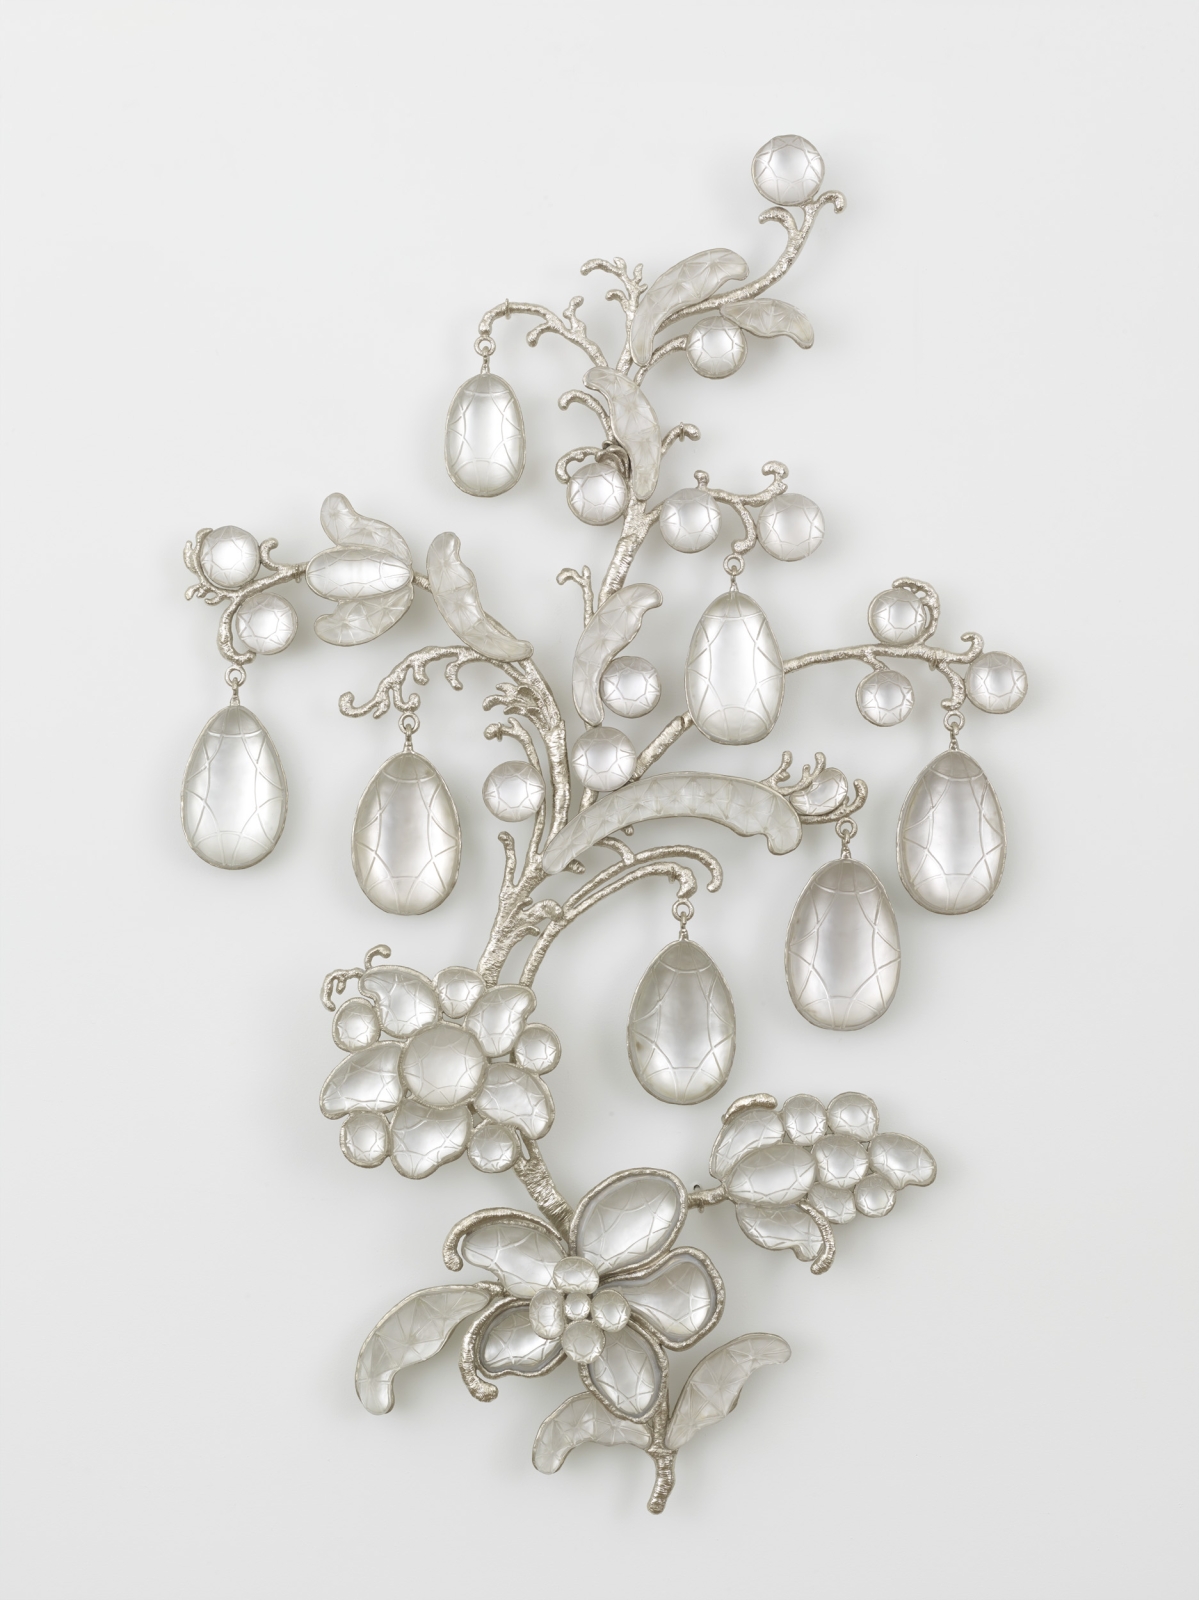 Timothy Horn
Silver Convention, 2015
nickel-plated bronze, lead crystal, silver foil
70 x 44 x 6 in.
177.8 x 111.76 x 15.24 cm